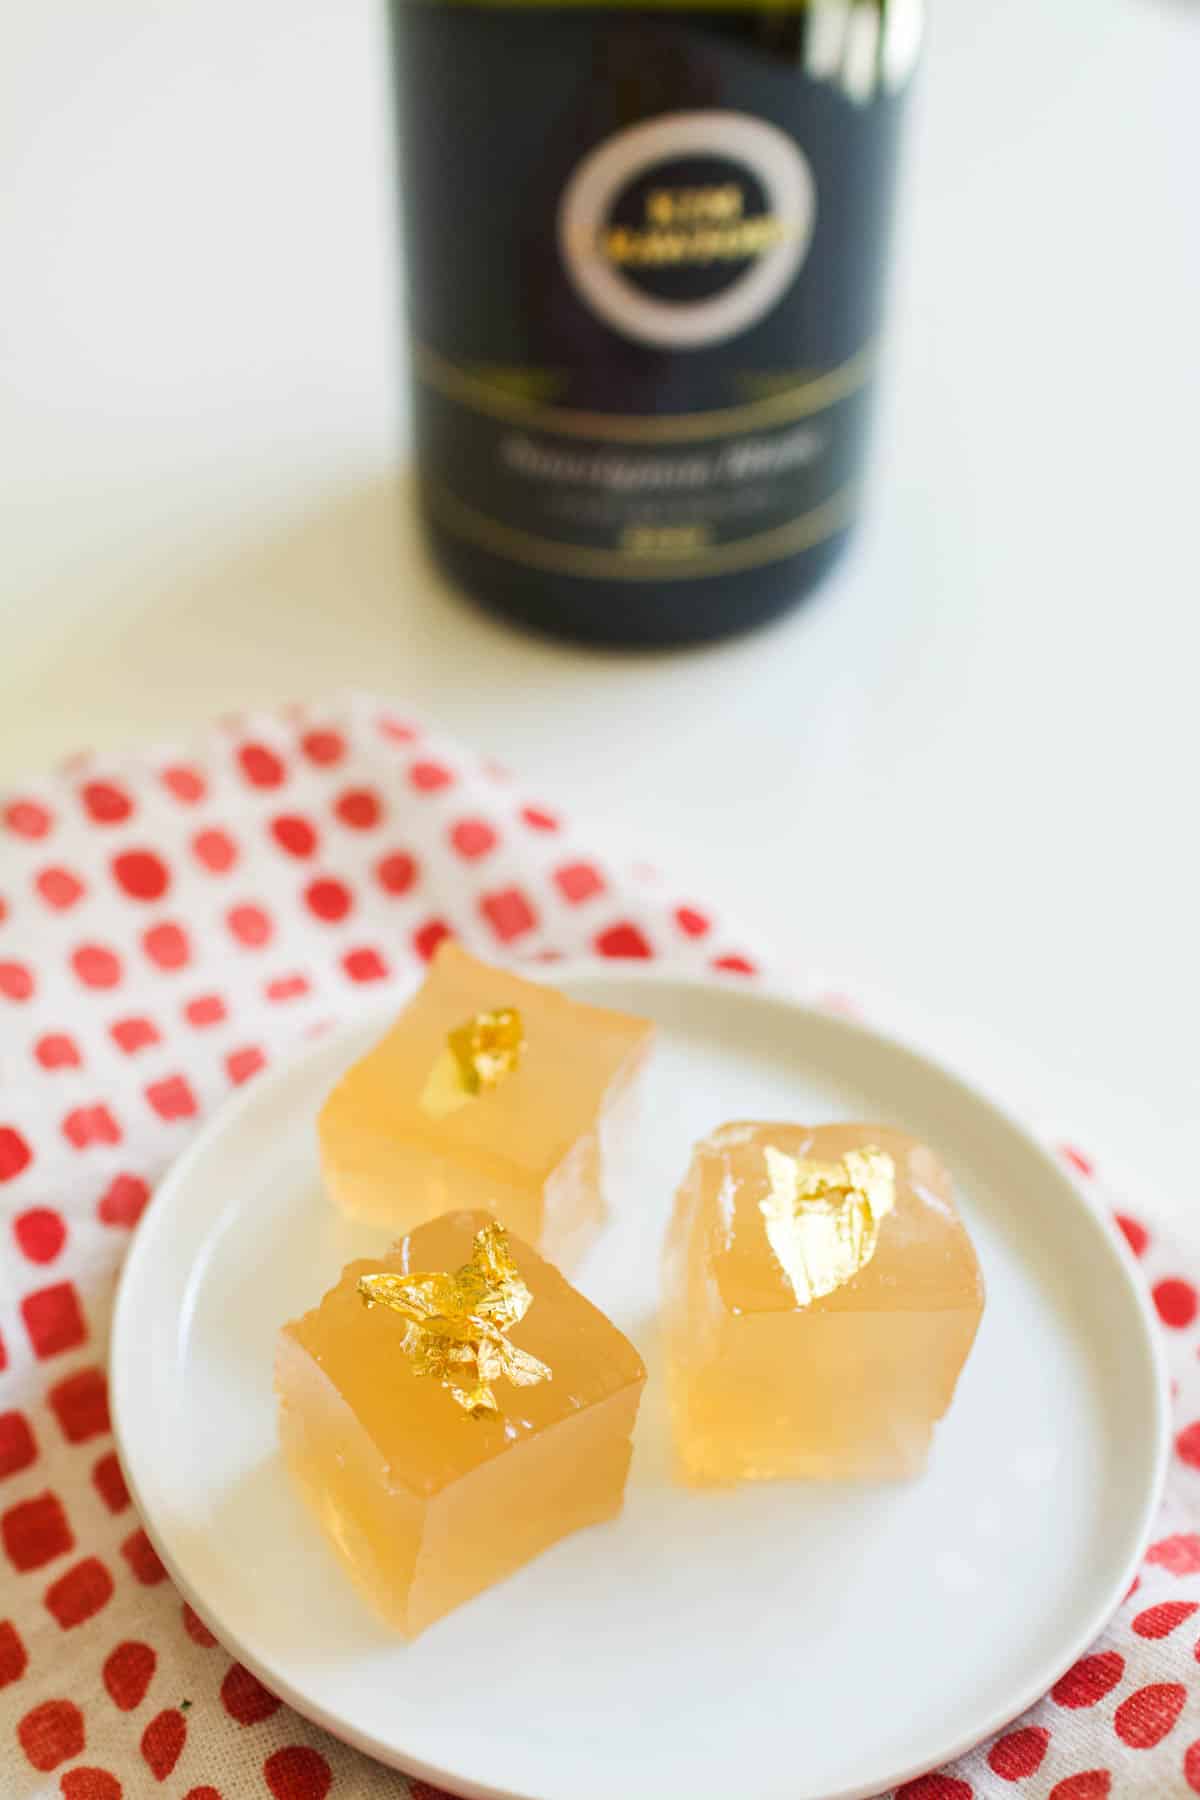 A small white dessert plate with 3 square pieces of jello topped with edible gold leaf.